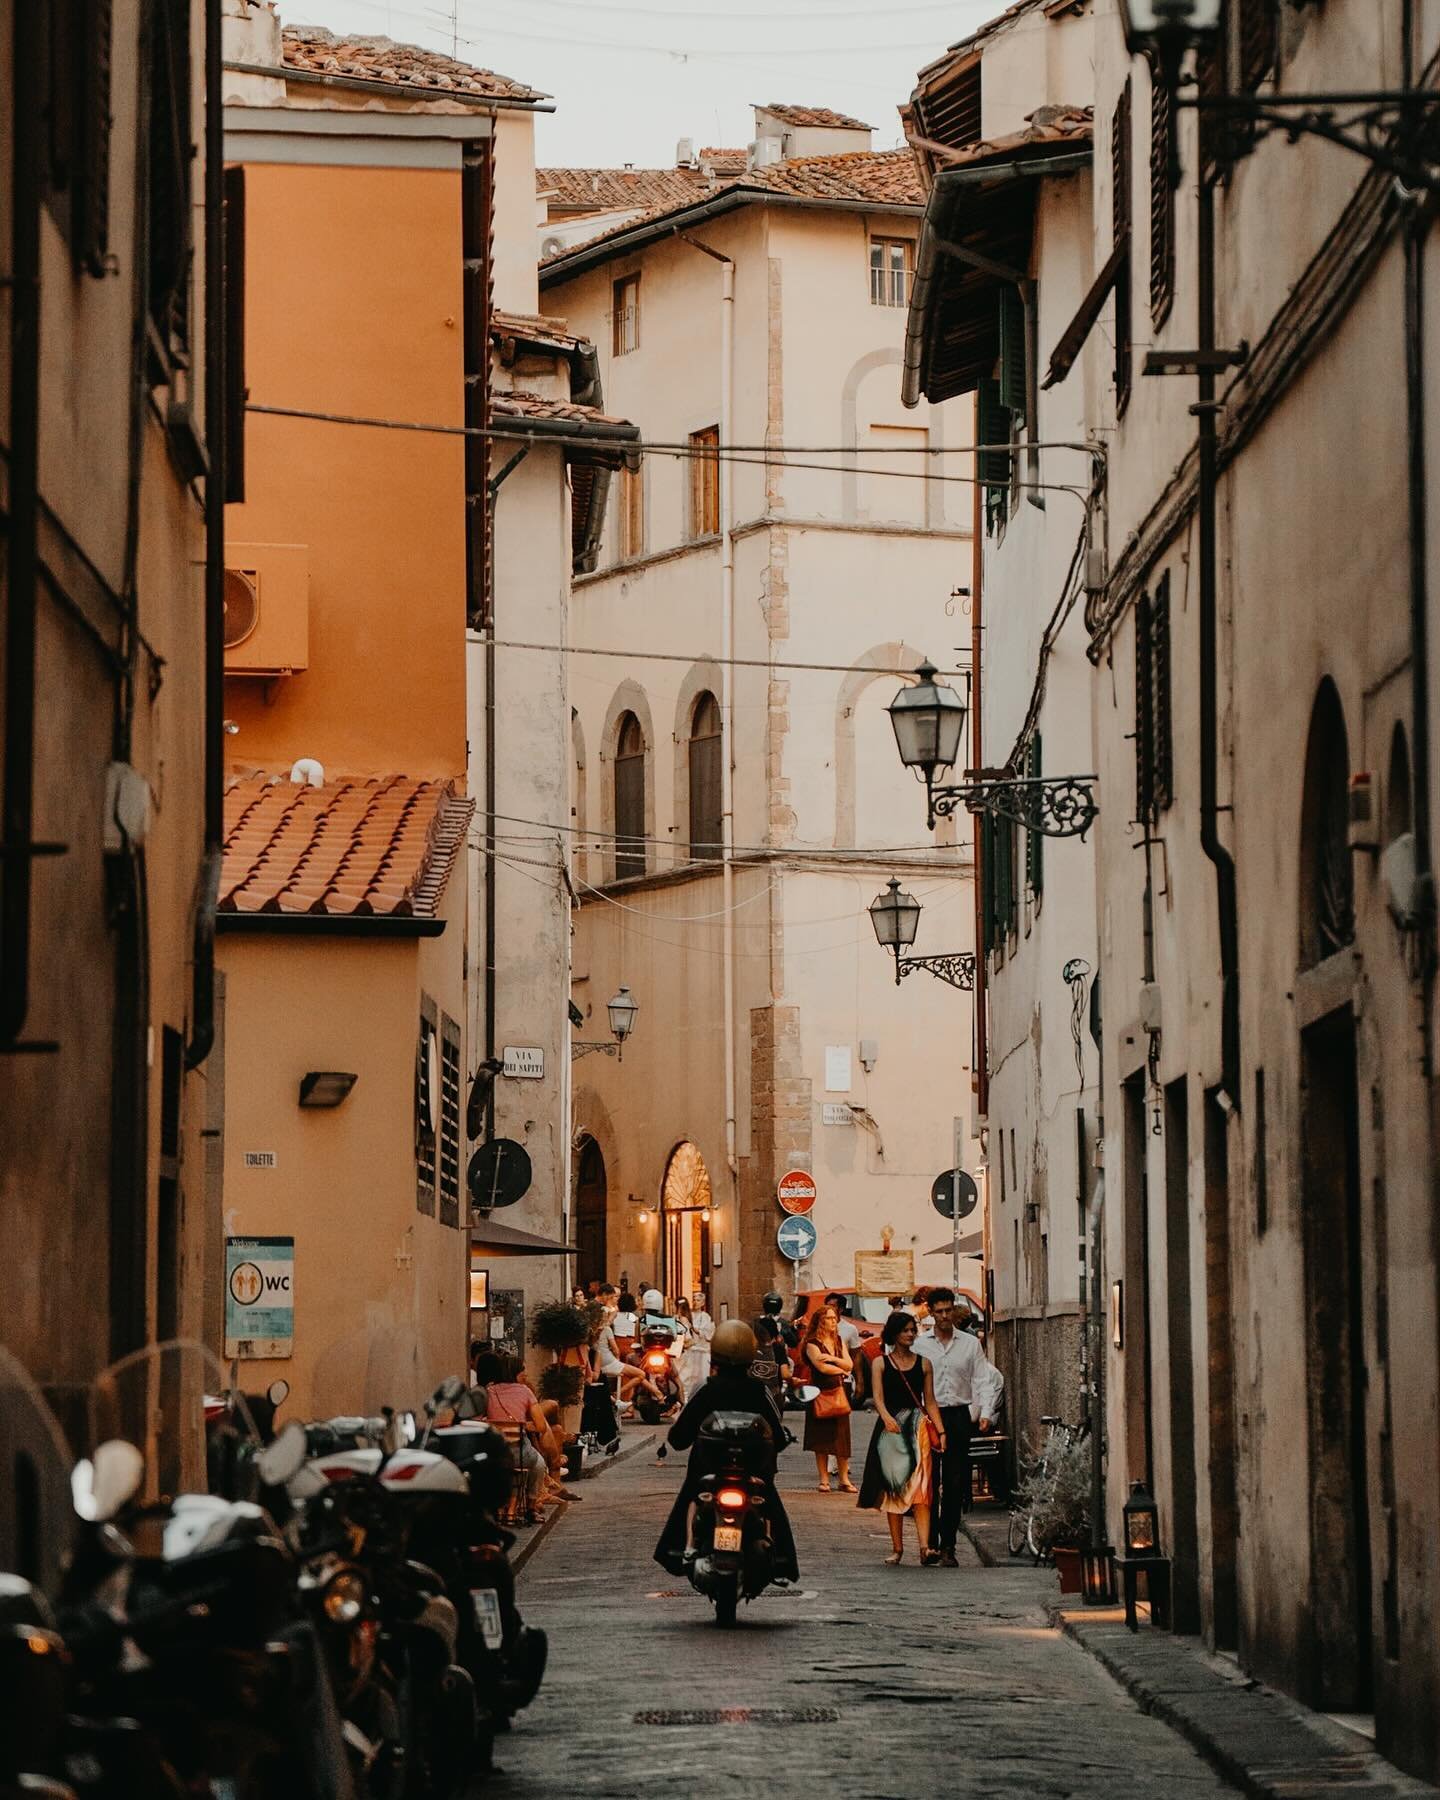 After a very long wait, we&rsquo;ve finally started releasing our Tuscany guides (just a few years late), featuring Florence, San Gimignano, and Pienza. 

They&rsquo;re super in depth, and feature some of our best photography ever, so if you&rsquo;re